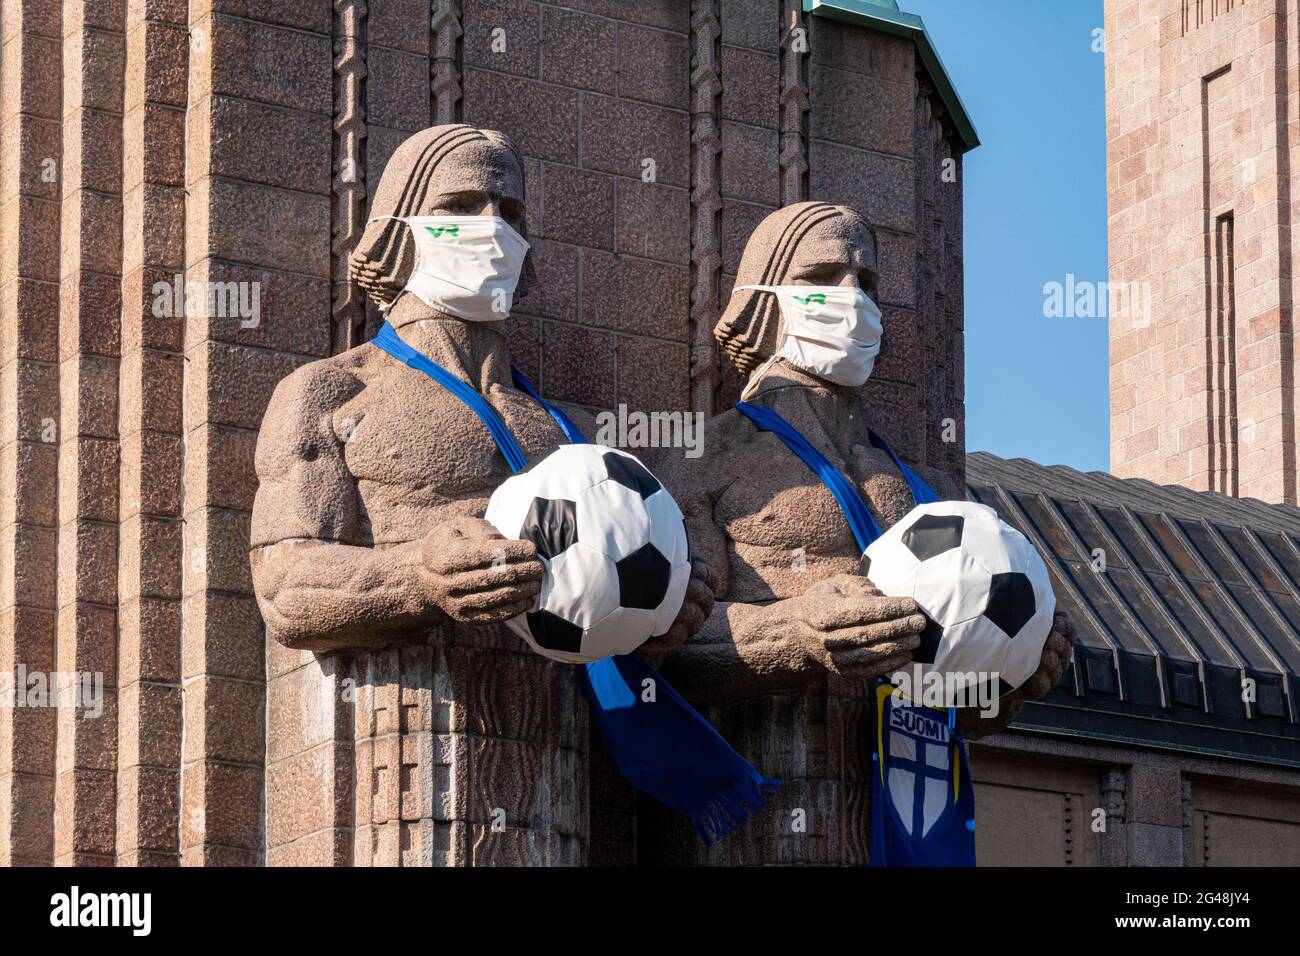 Helsinki Central Railway Station statues wearing facemasks and holding footballs to celebrate European Football Championship games Stock Photo